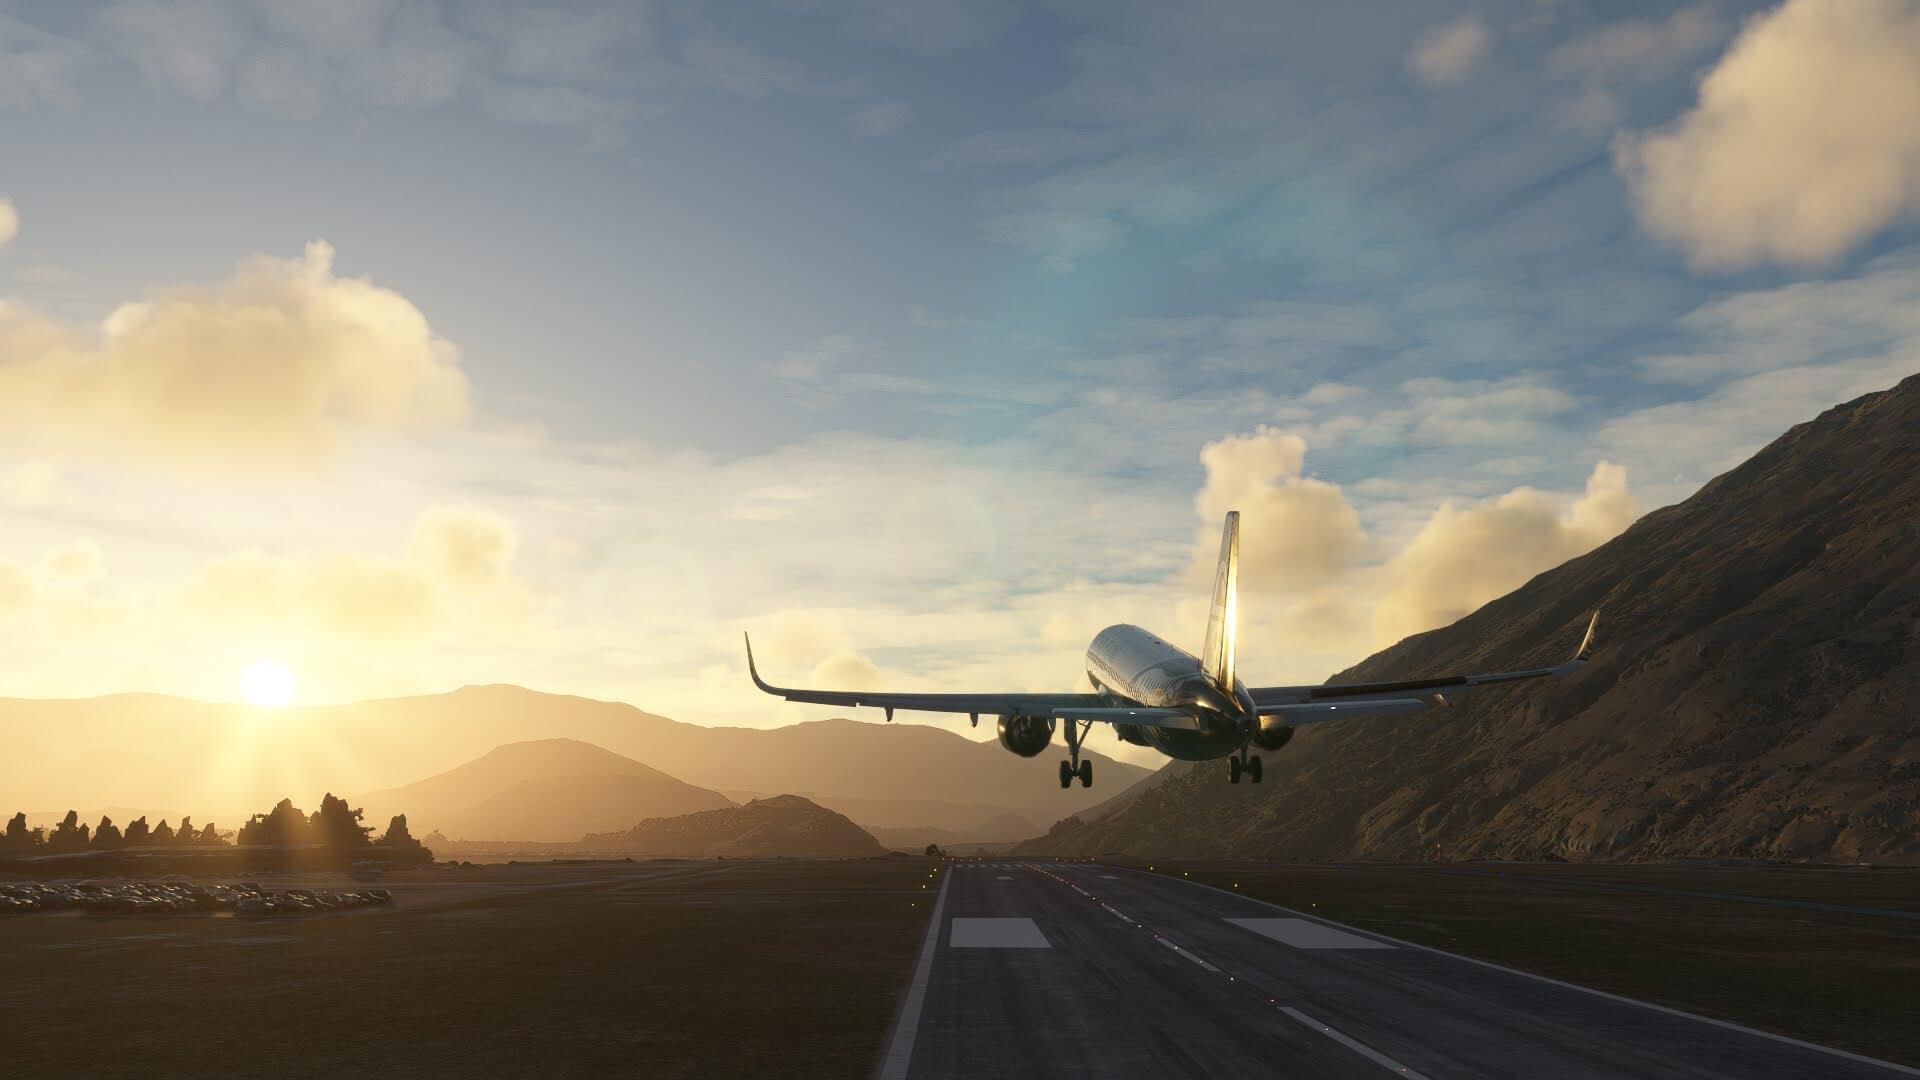 An Airbus A320 NEO takes off from Queenstown, New Zealand, with the sun in view over the mountains in the distance.